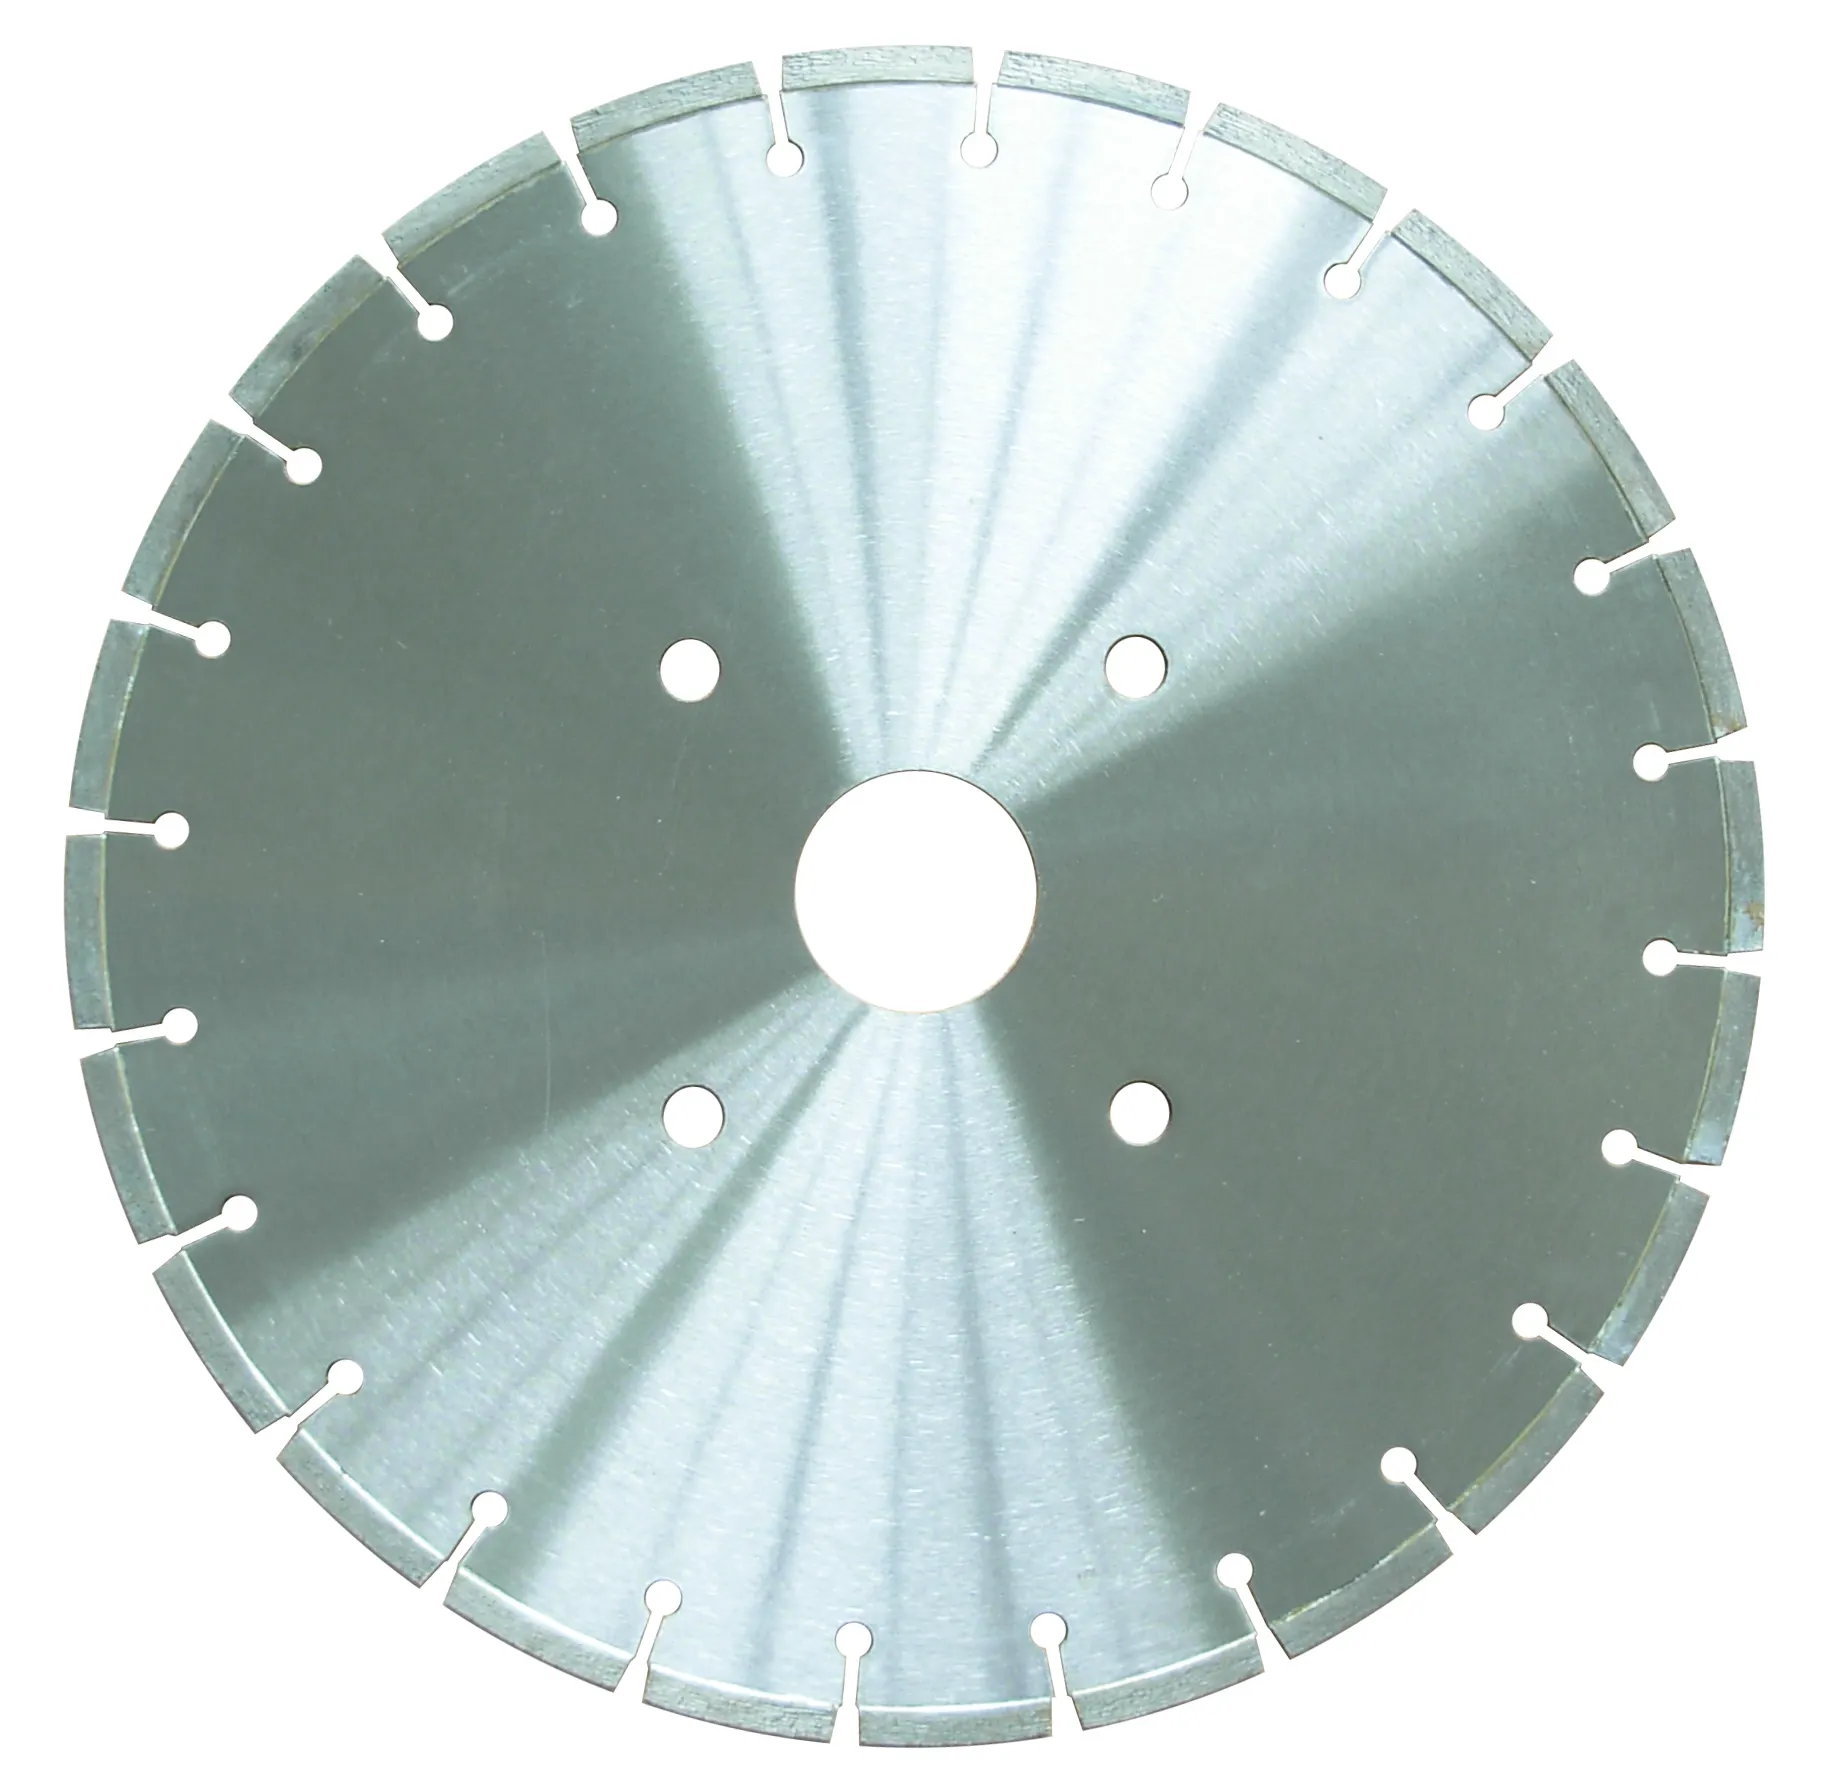 China Factory High Quality 350MM 14 Inch Machine Marble Concrete Silent Diamond Saw Blade Cutting Disc Silent Tools